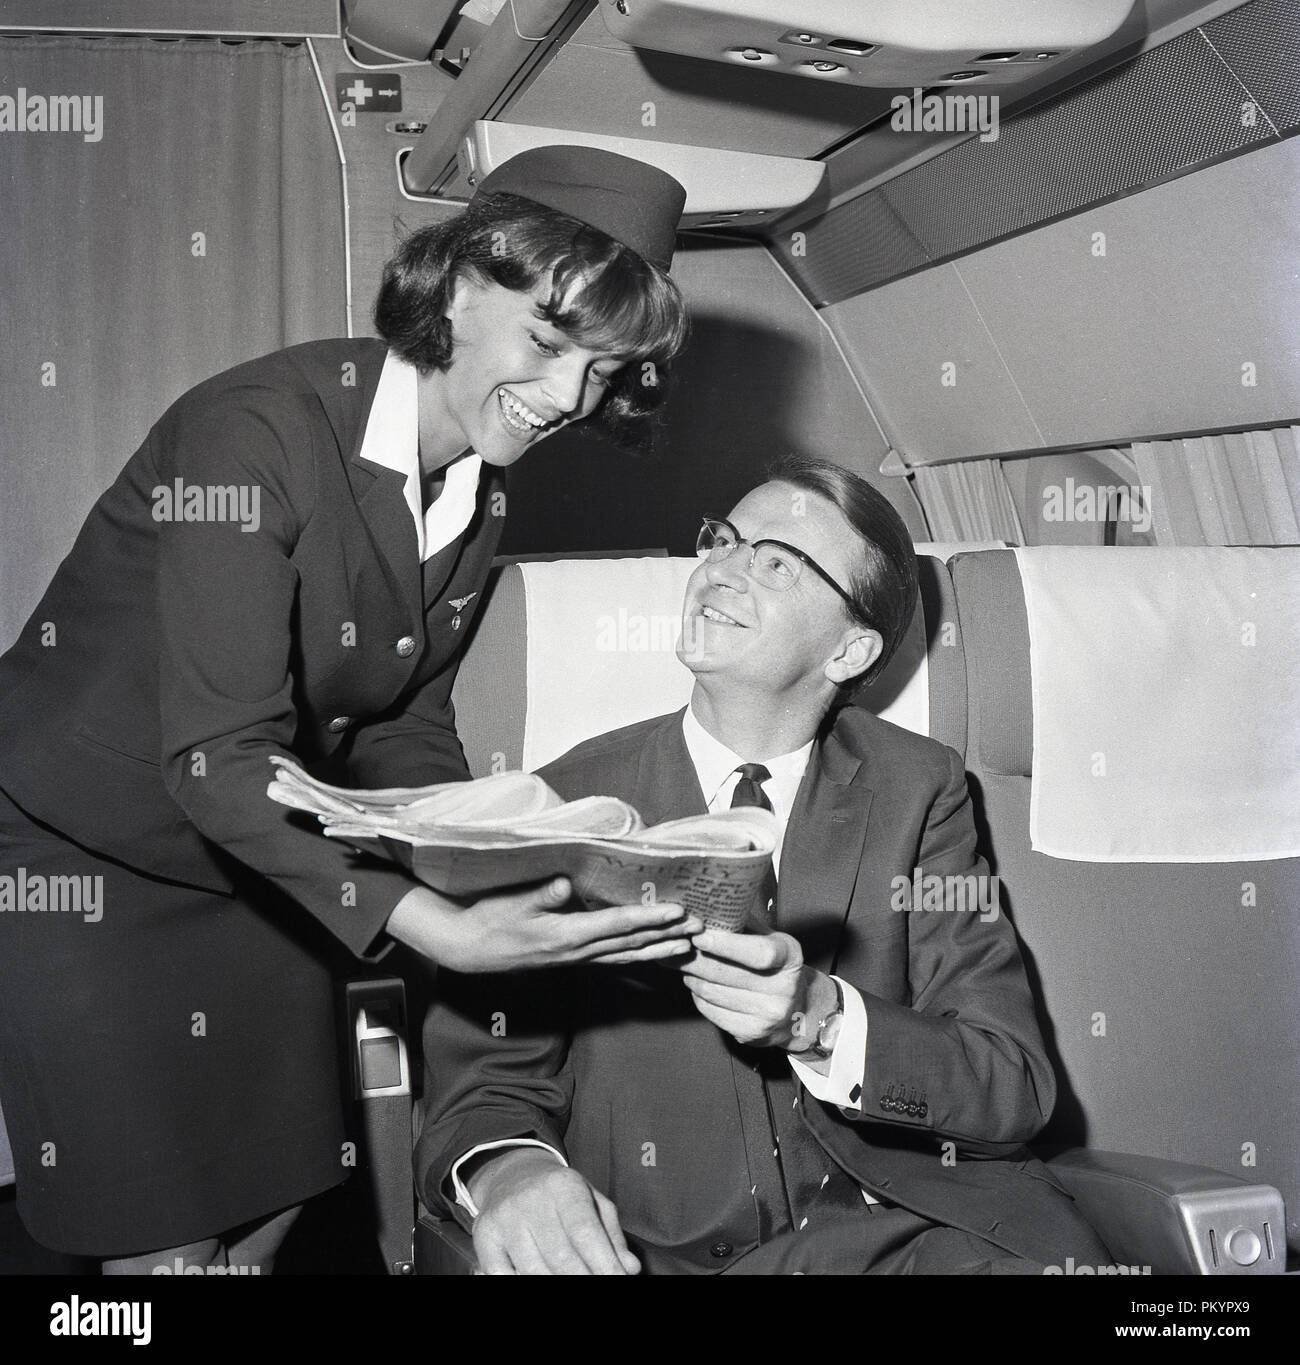 1960s, historical, a uniformed female flight attendant presenting a daily newspaper to a male passenger sitting in a business class seat on the aircraft. Stock Photo